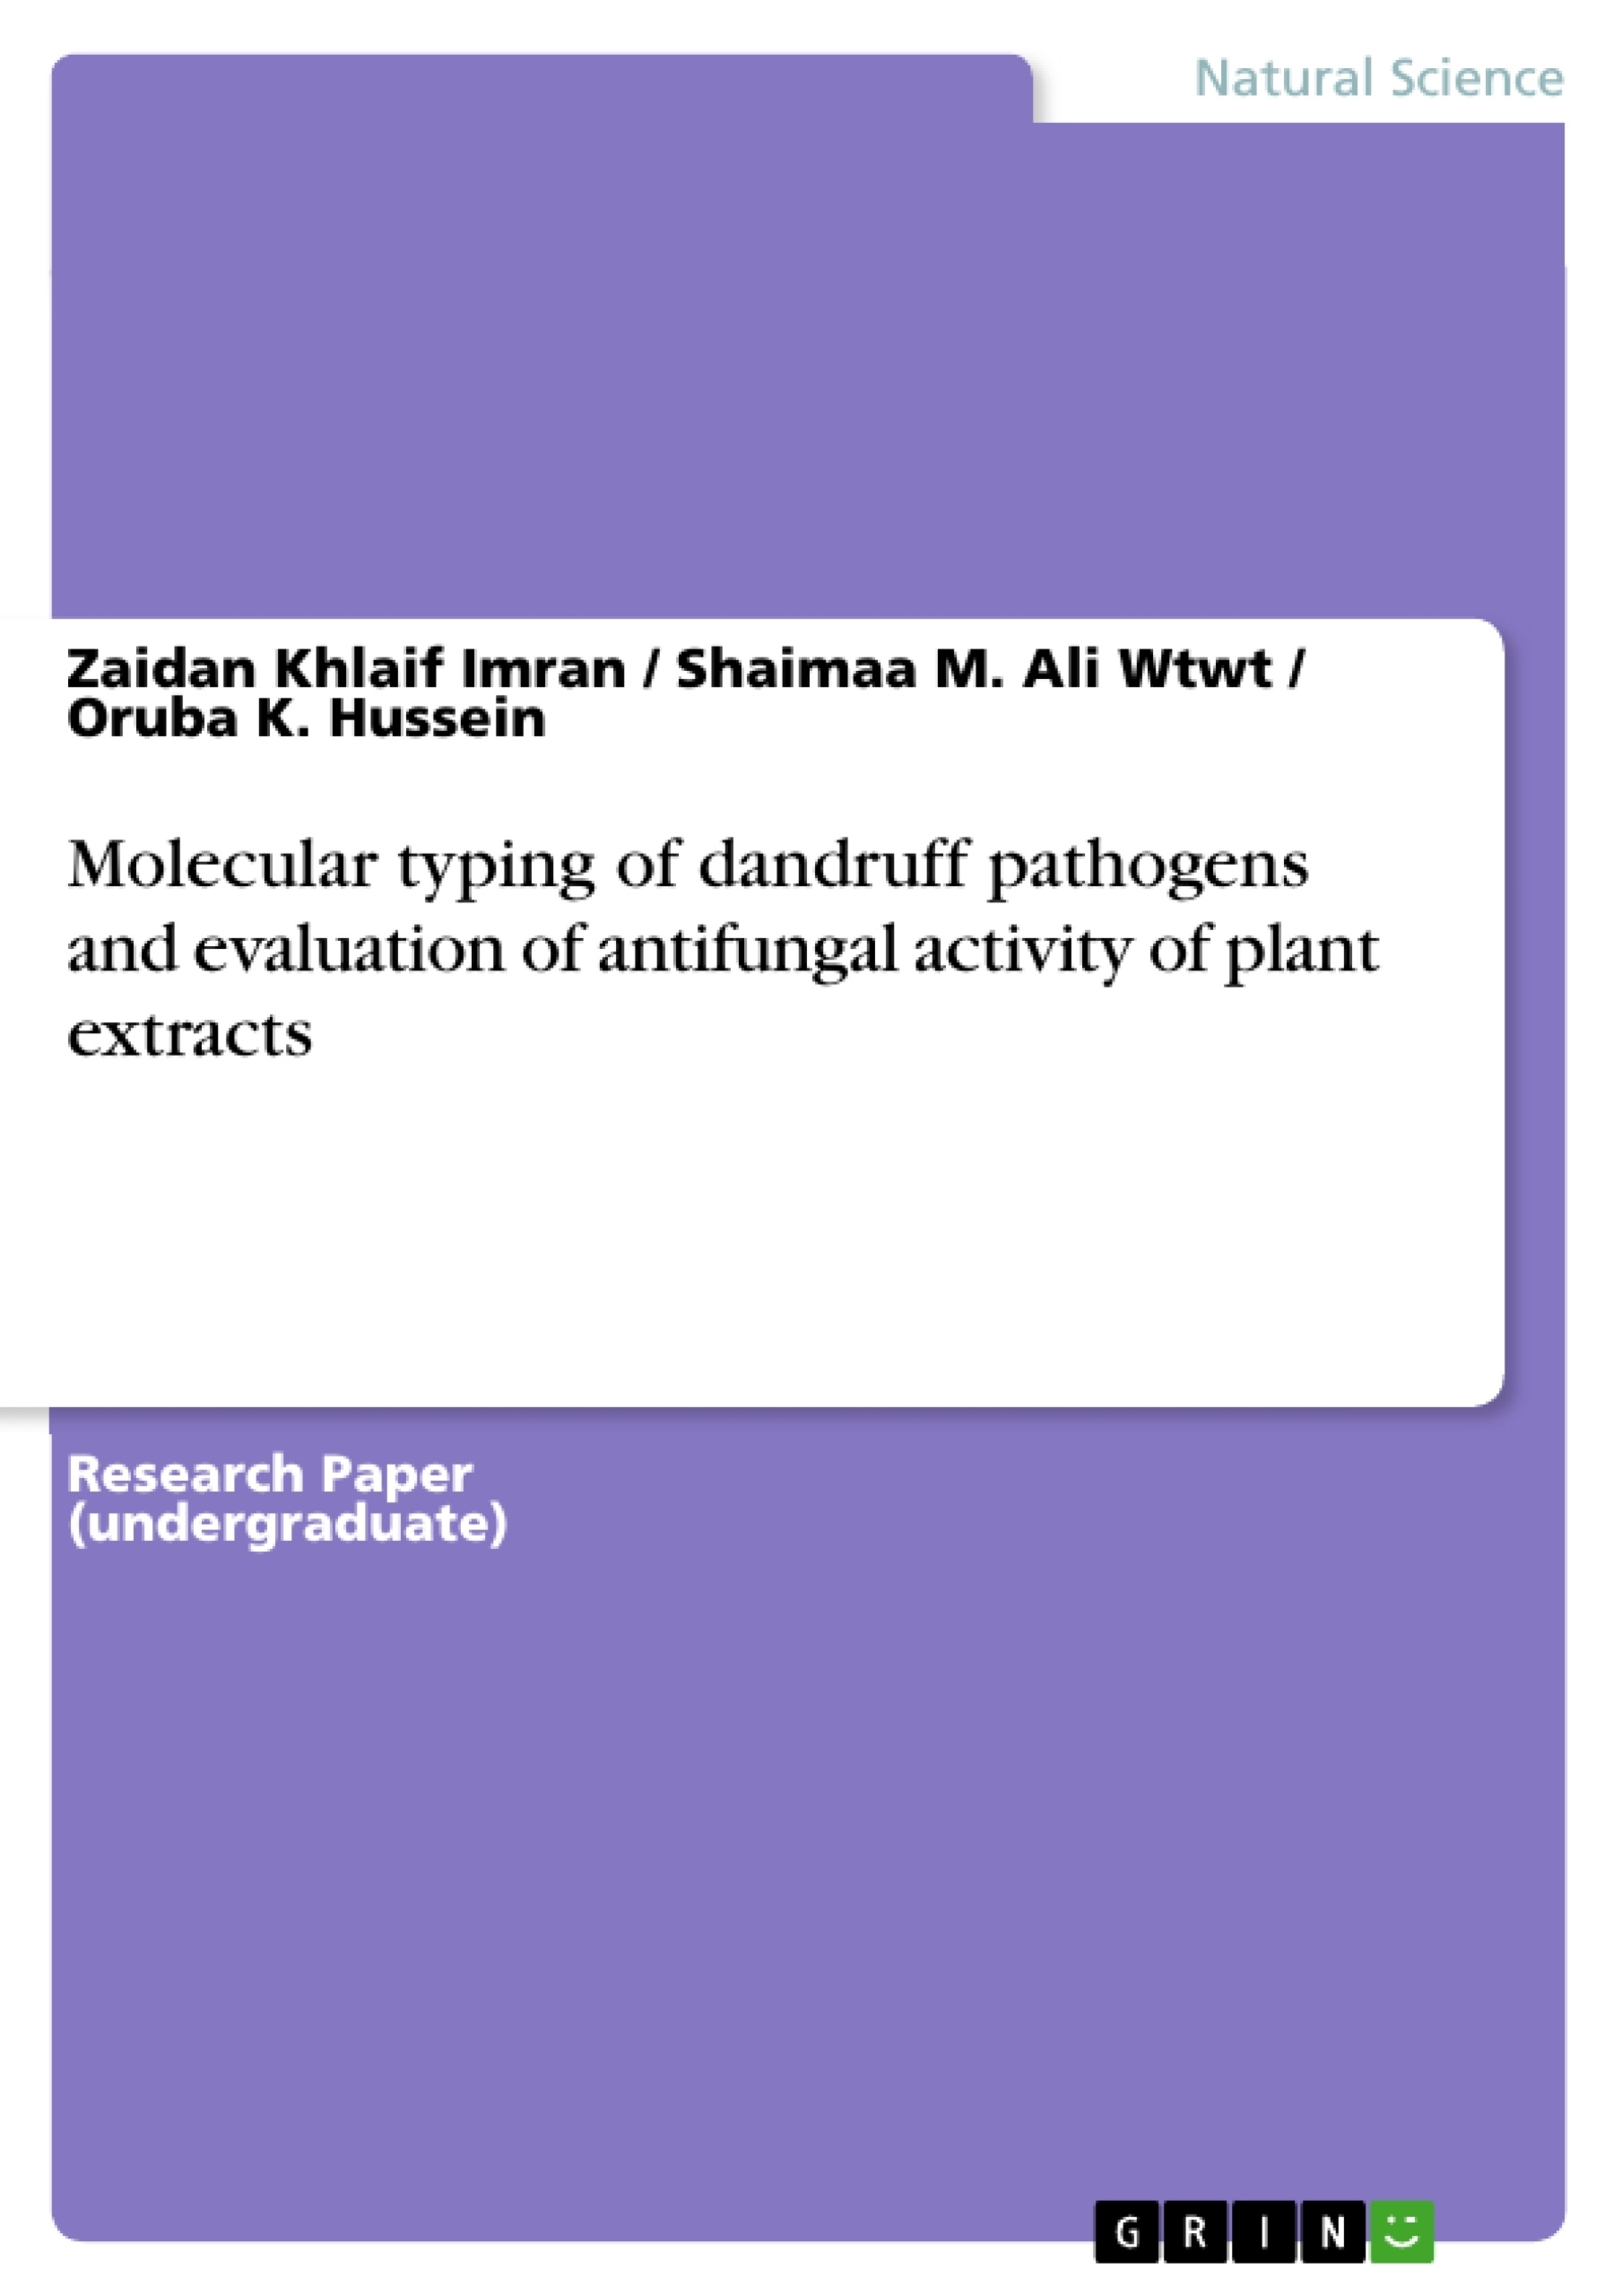 Titre: Molecular typing of dandruff pathogens and evaluation of antifungal activity of plant extracts